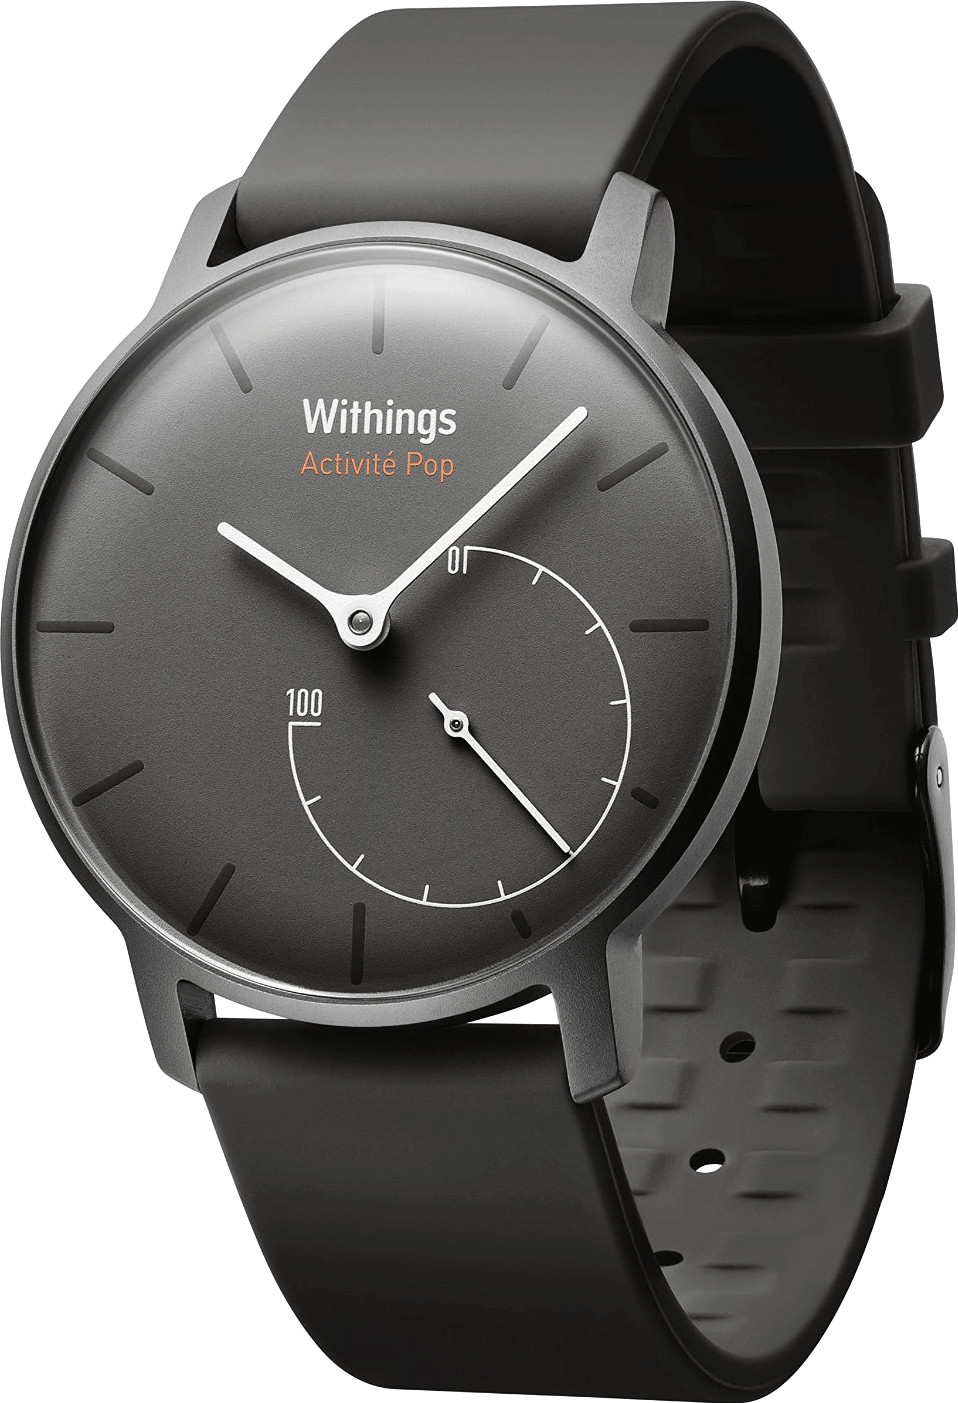 Withings Activité Pop shark grey